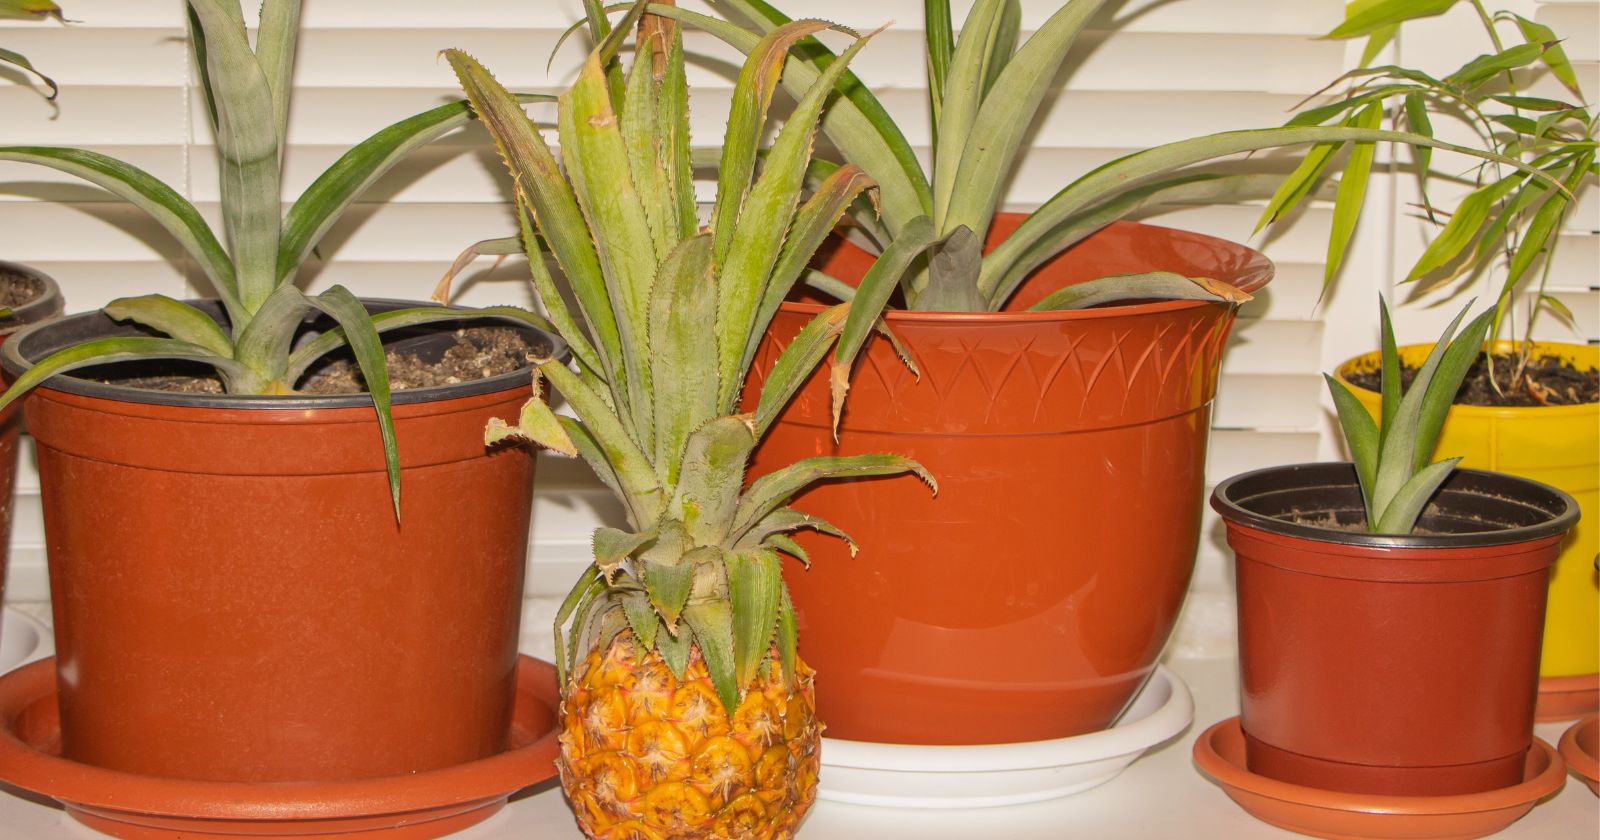 Benefits Of Pineapples For The Elderly